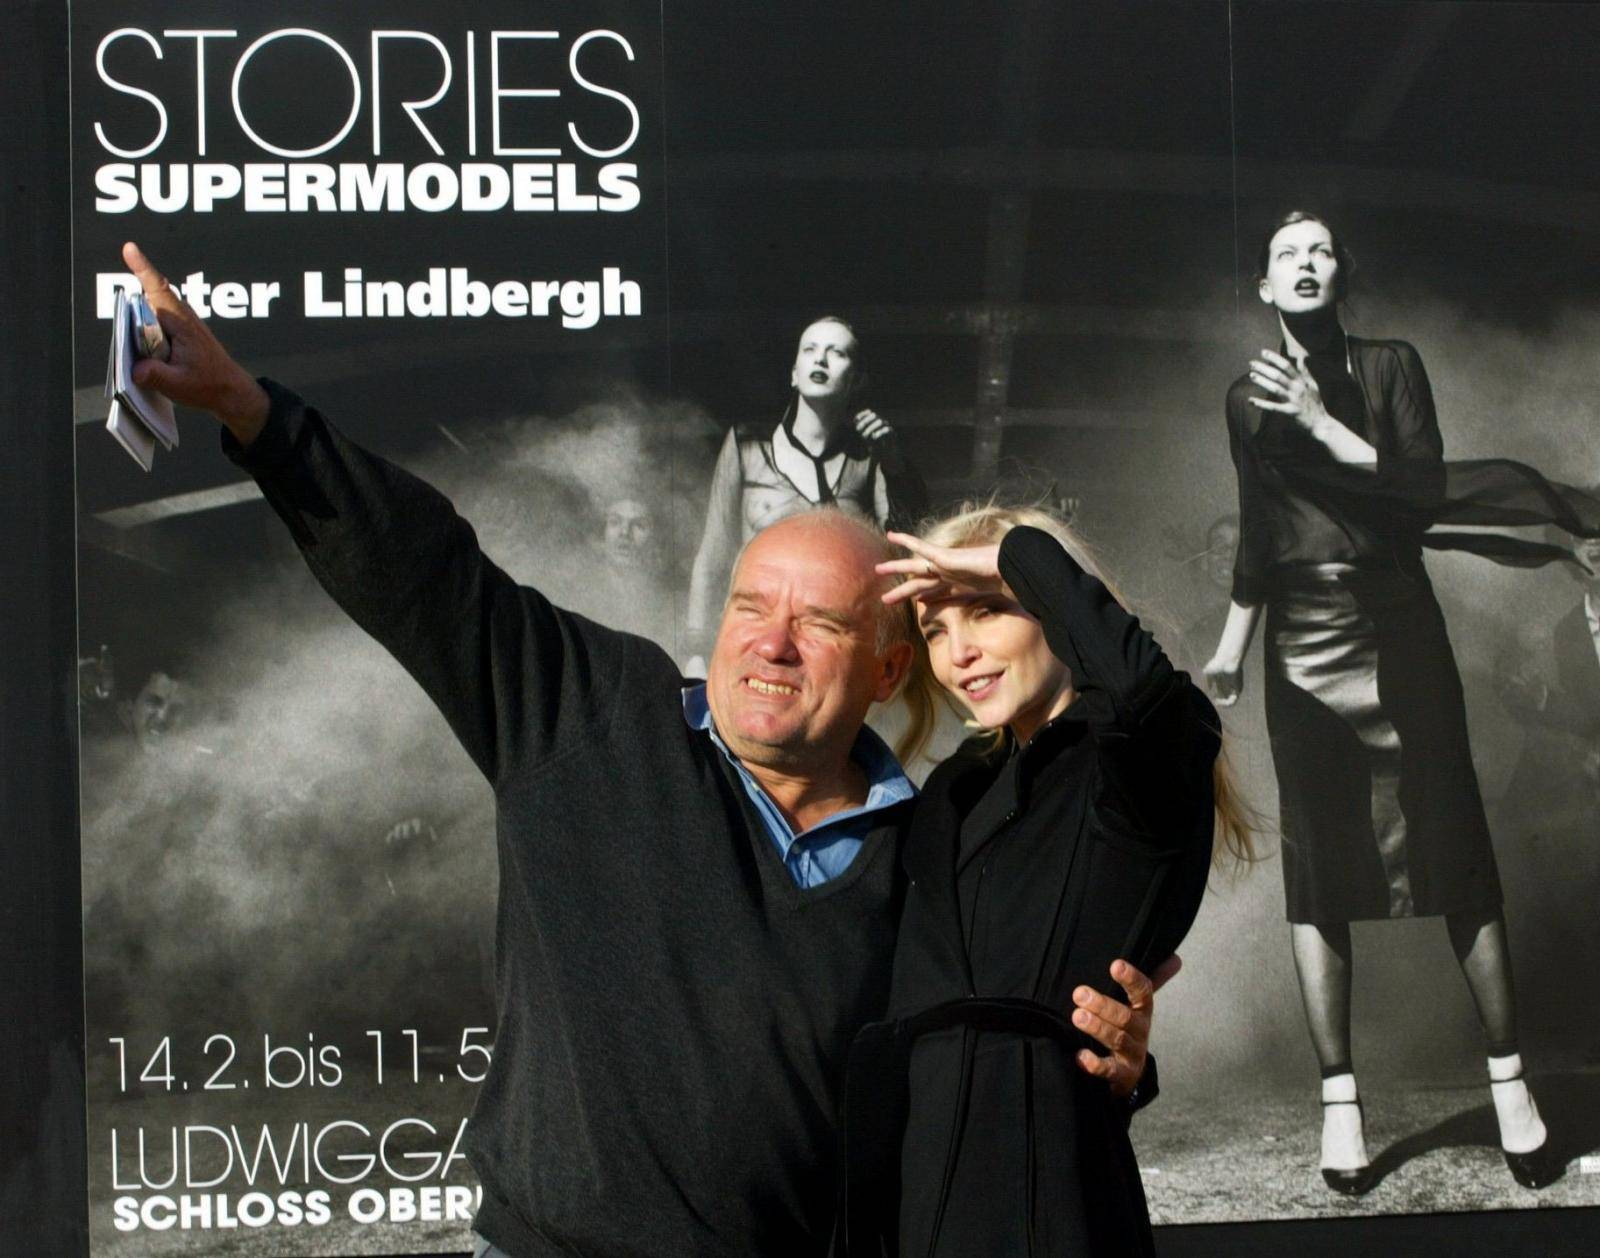 Photographer Peter Lindbergh died